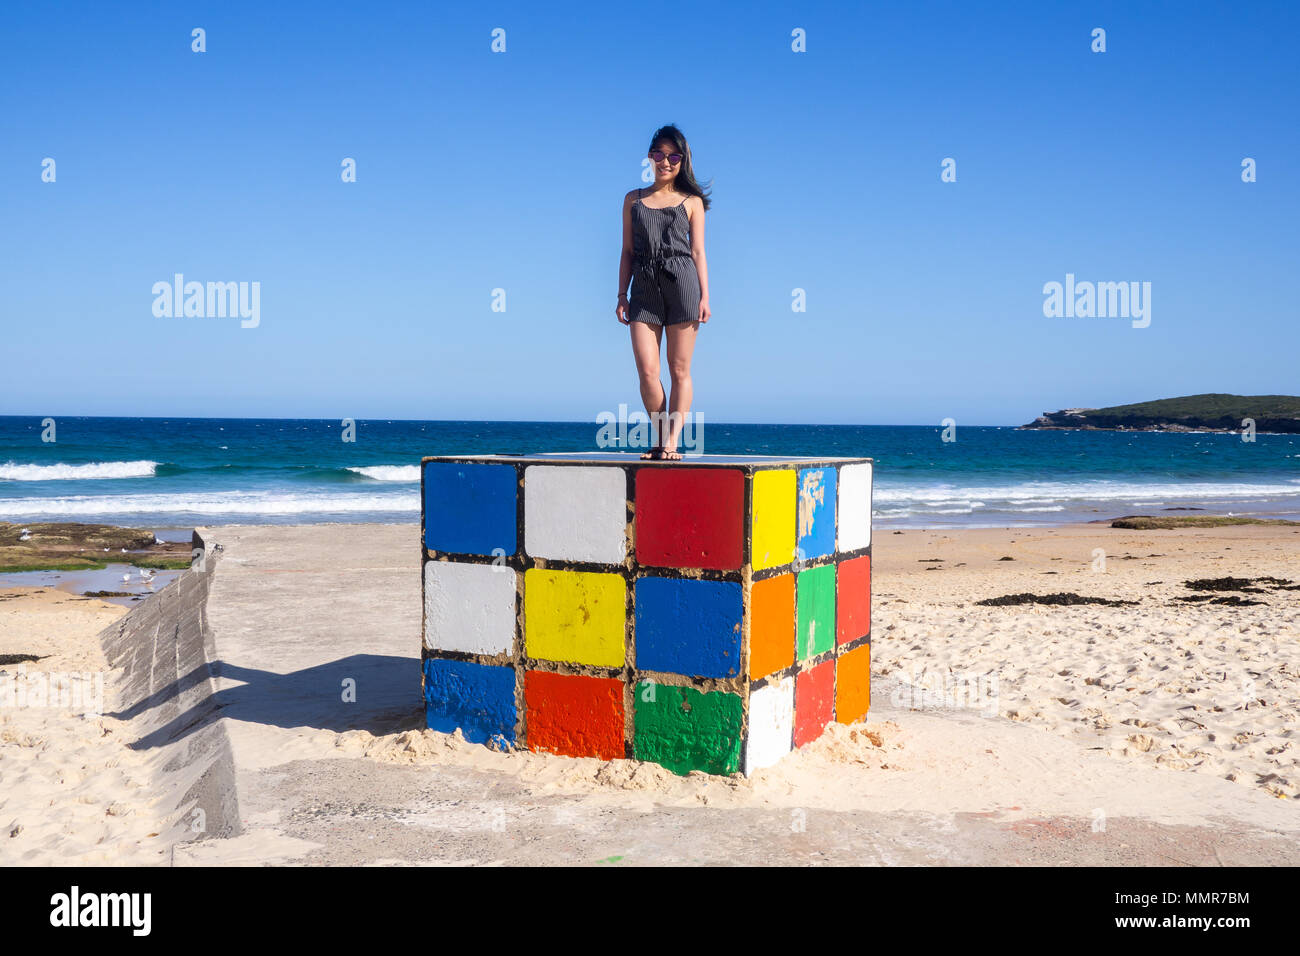 Young woman stands on giant Rubik cube at Maroubra Beach, Sydney, Australia Stock Photo